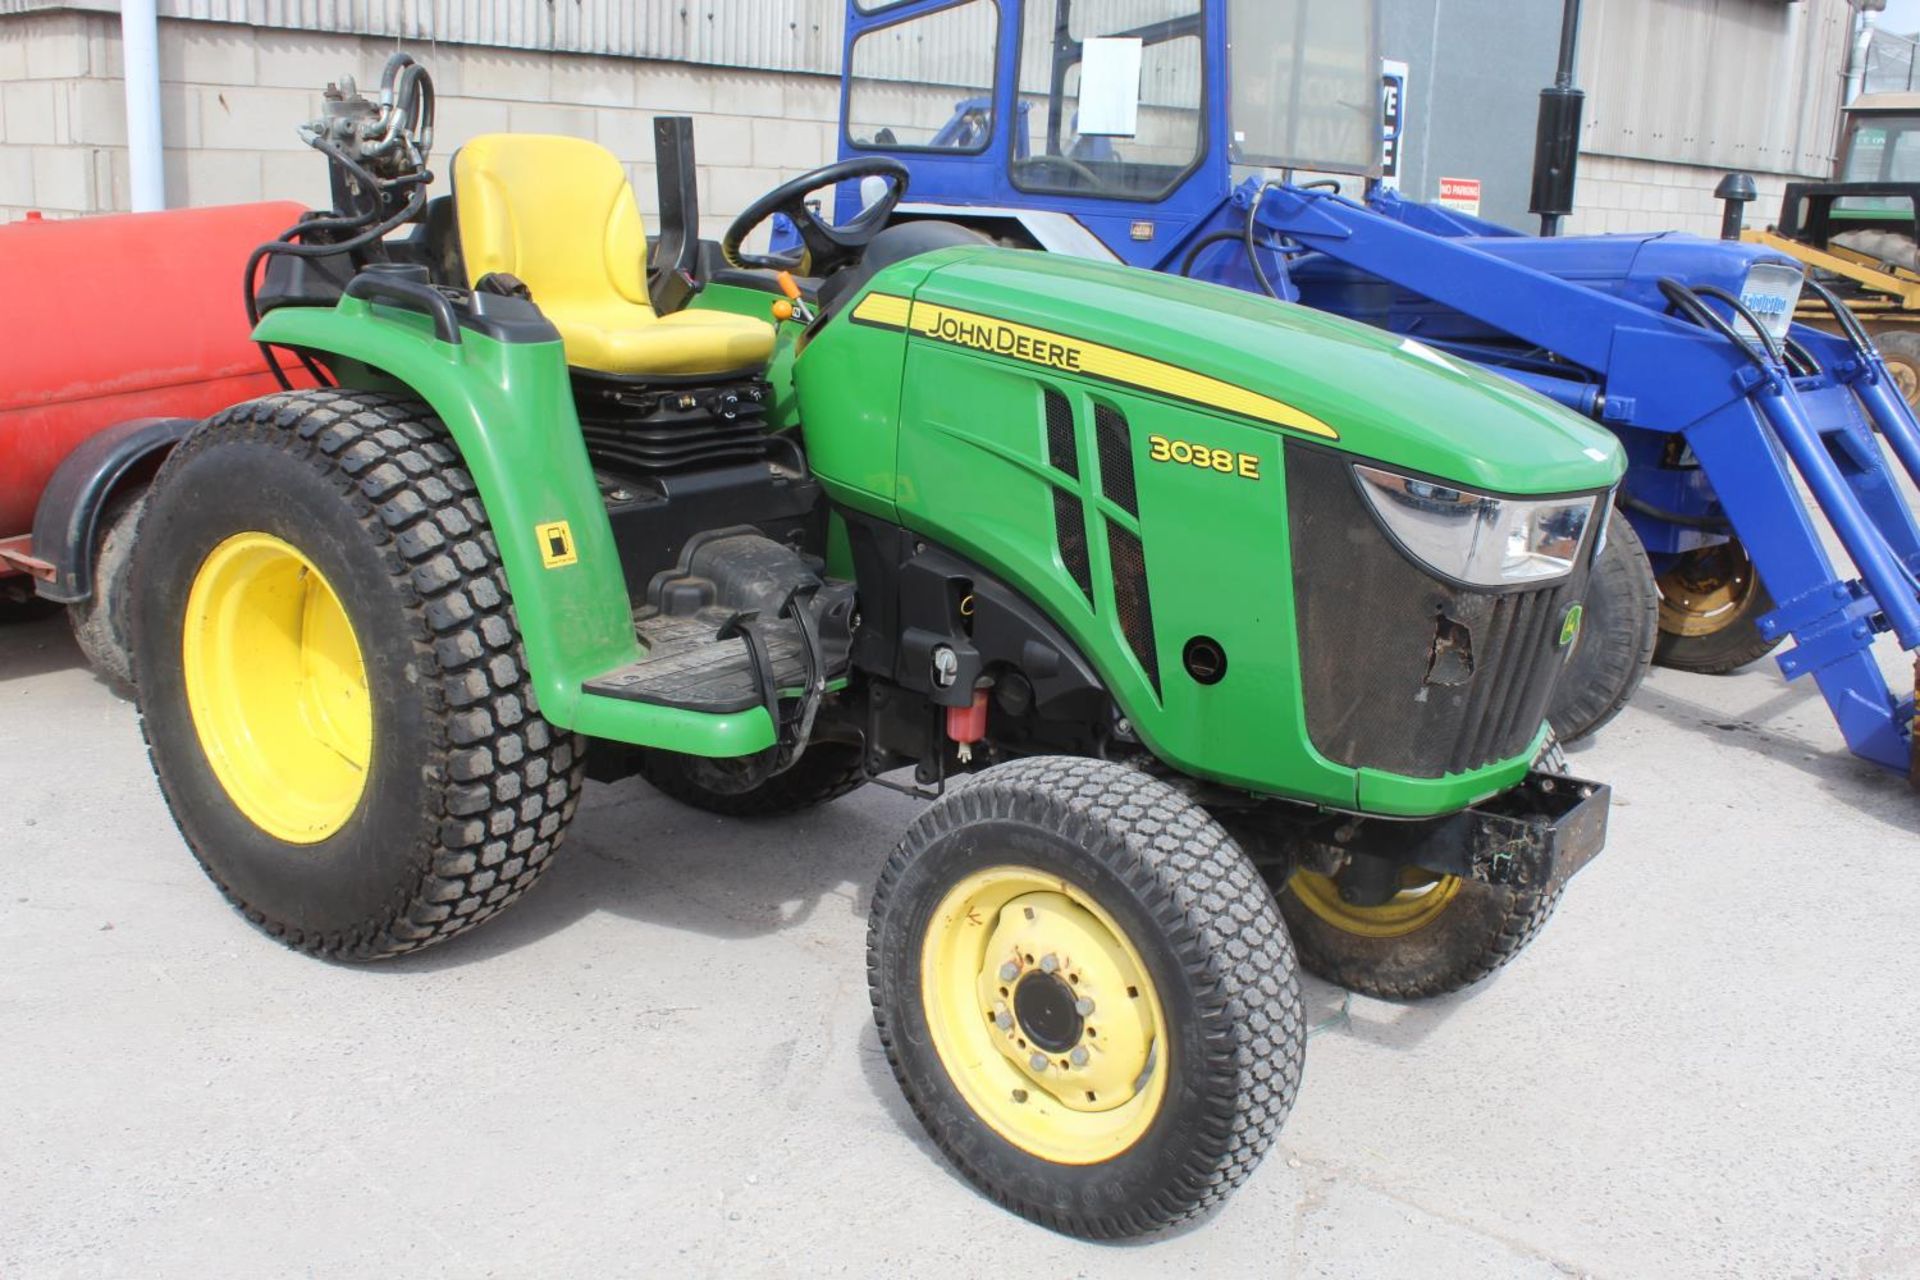 JOHN DEERE 3038E COMPACT TRACTOR 2021 617 HOURS APPROX ONE OWNER FROM NEW USER MANUAL FULL TER